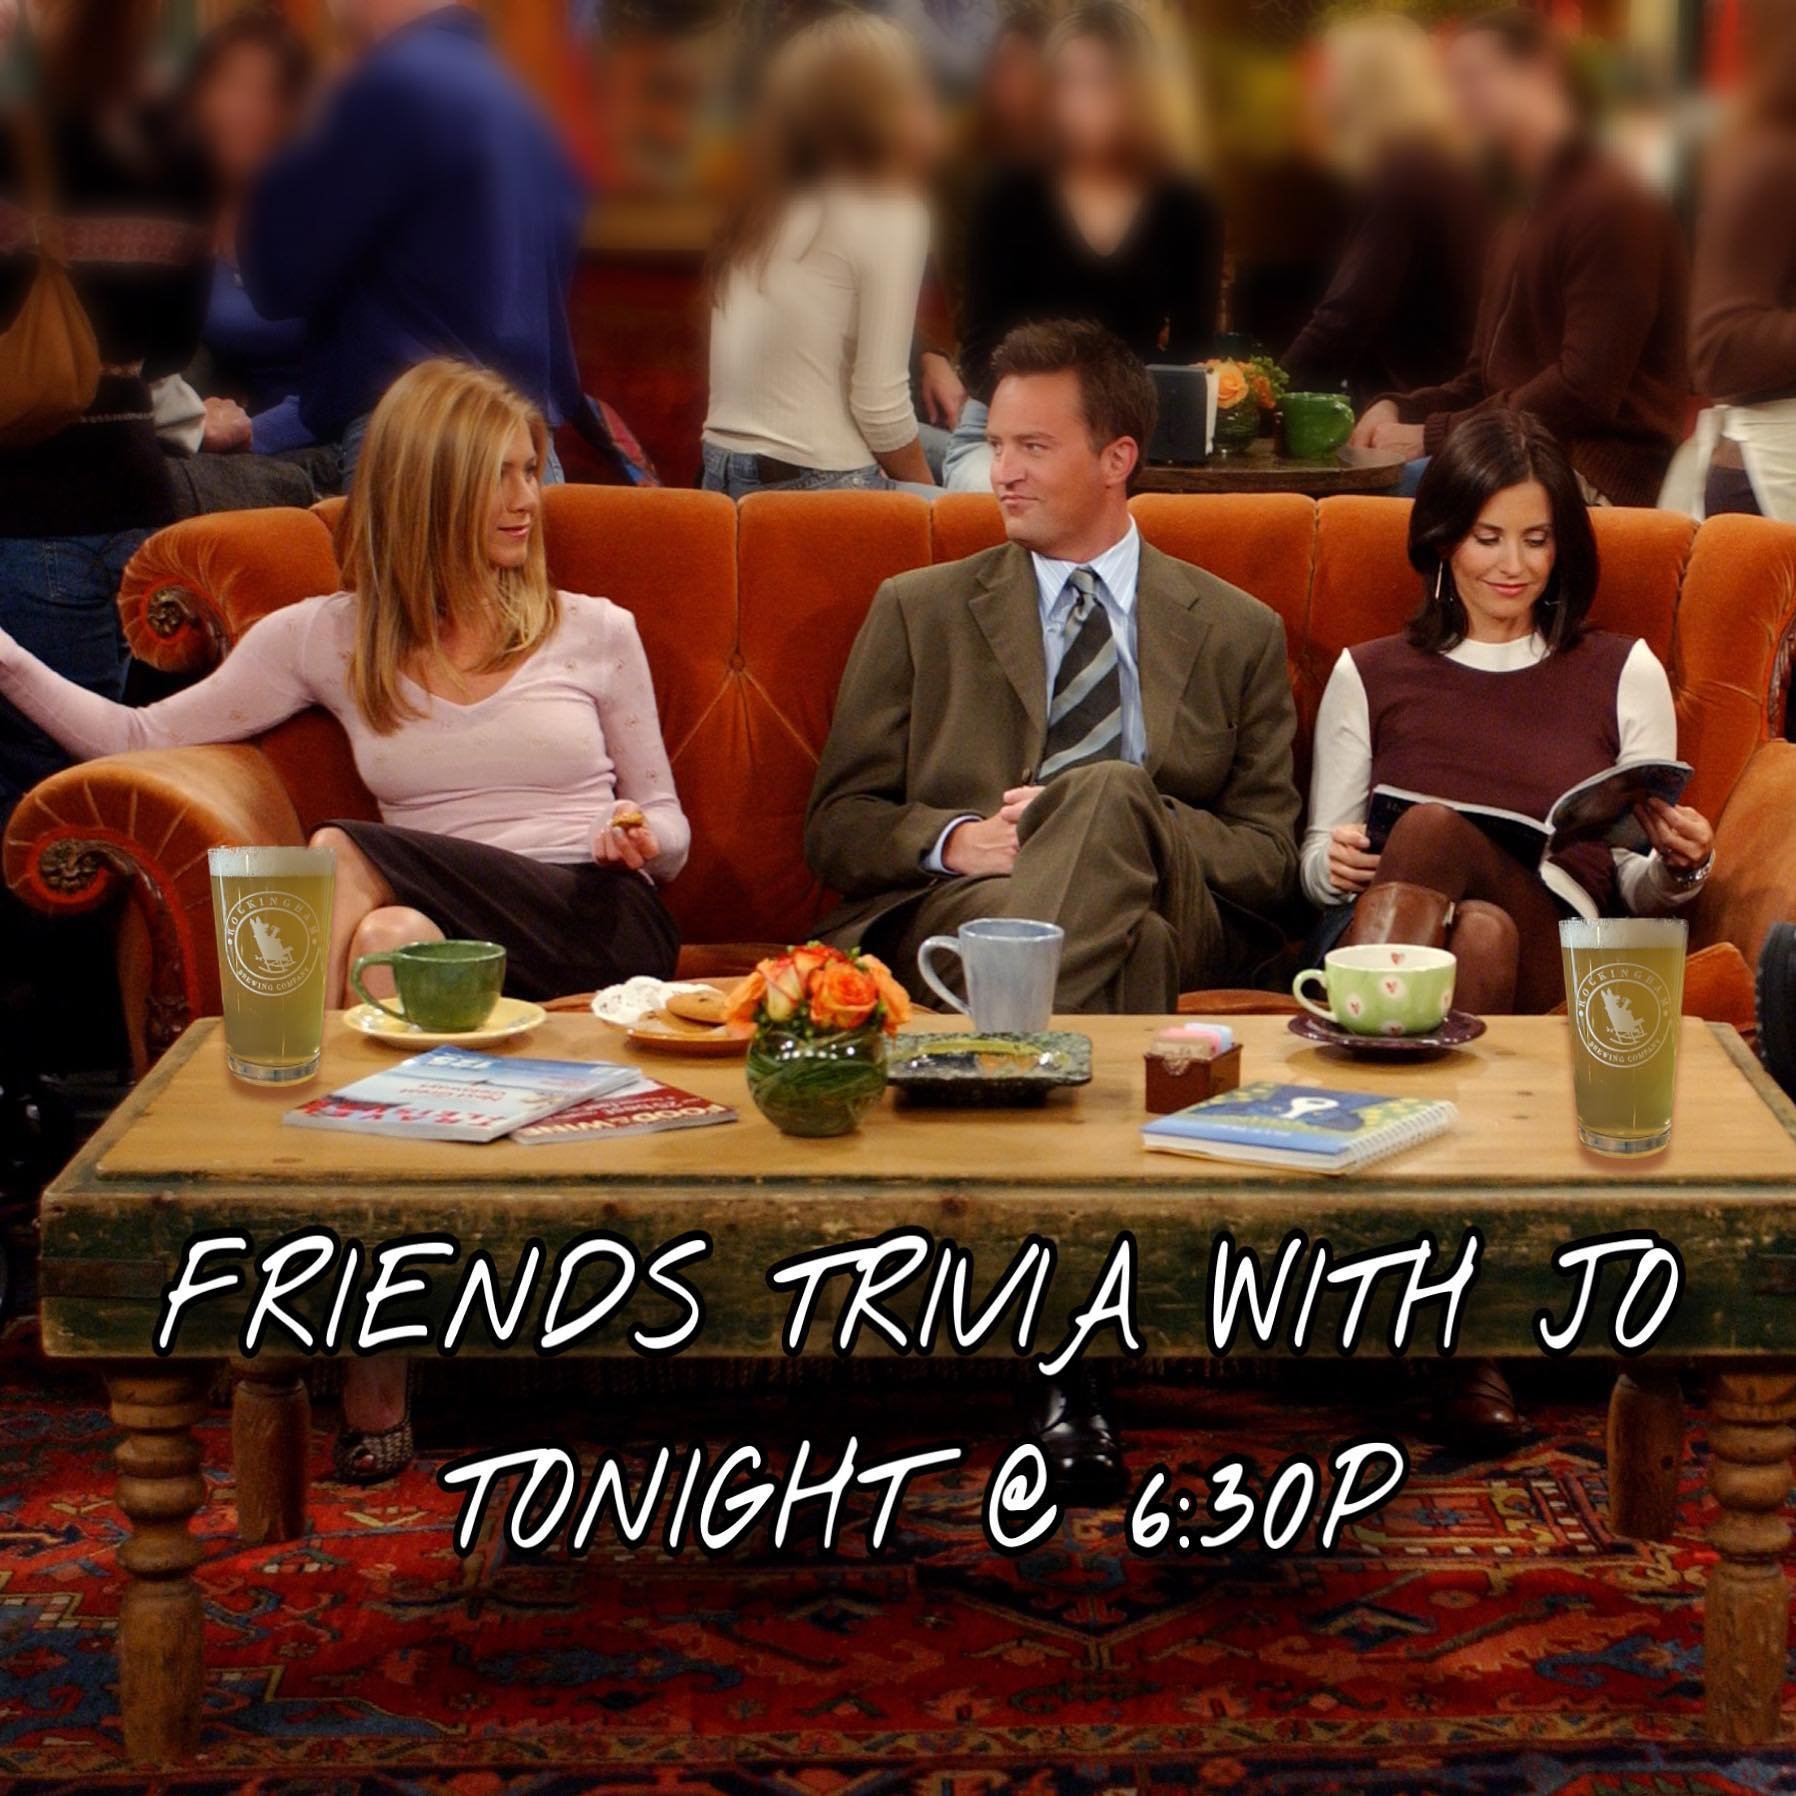 Time to channel your inner Monica! Our themed Trivia series with Jo continues tonight &mdash; this time with the highly competitive category of Friends! It&rsquo;s free to play and the top two winning teams will receive taproom gift cards. Be sure to